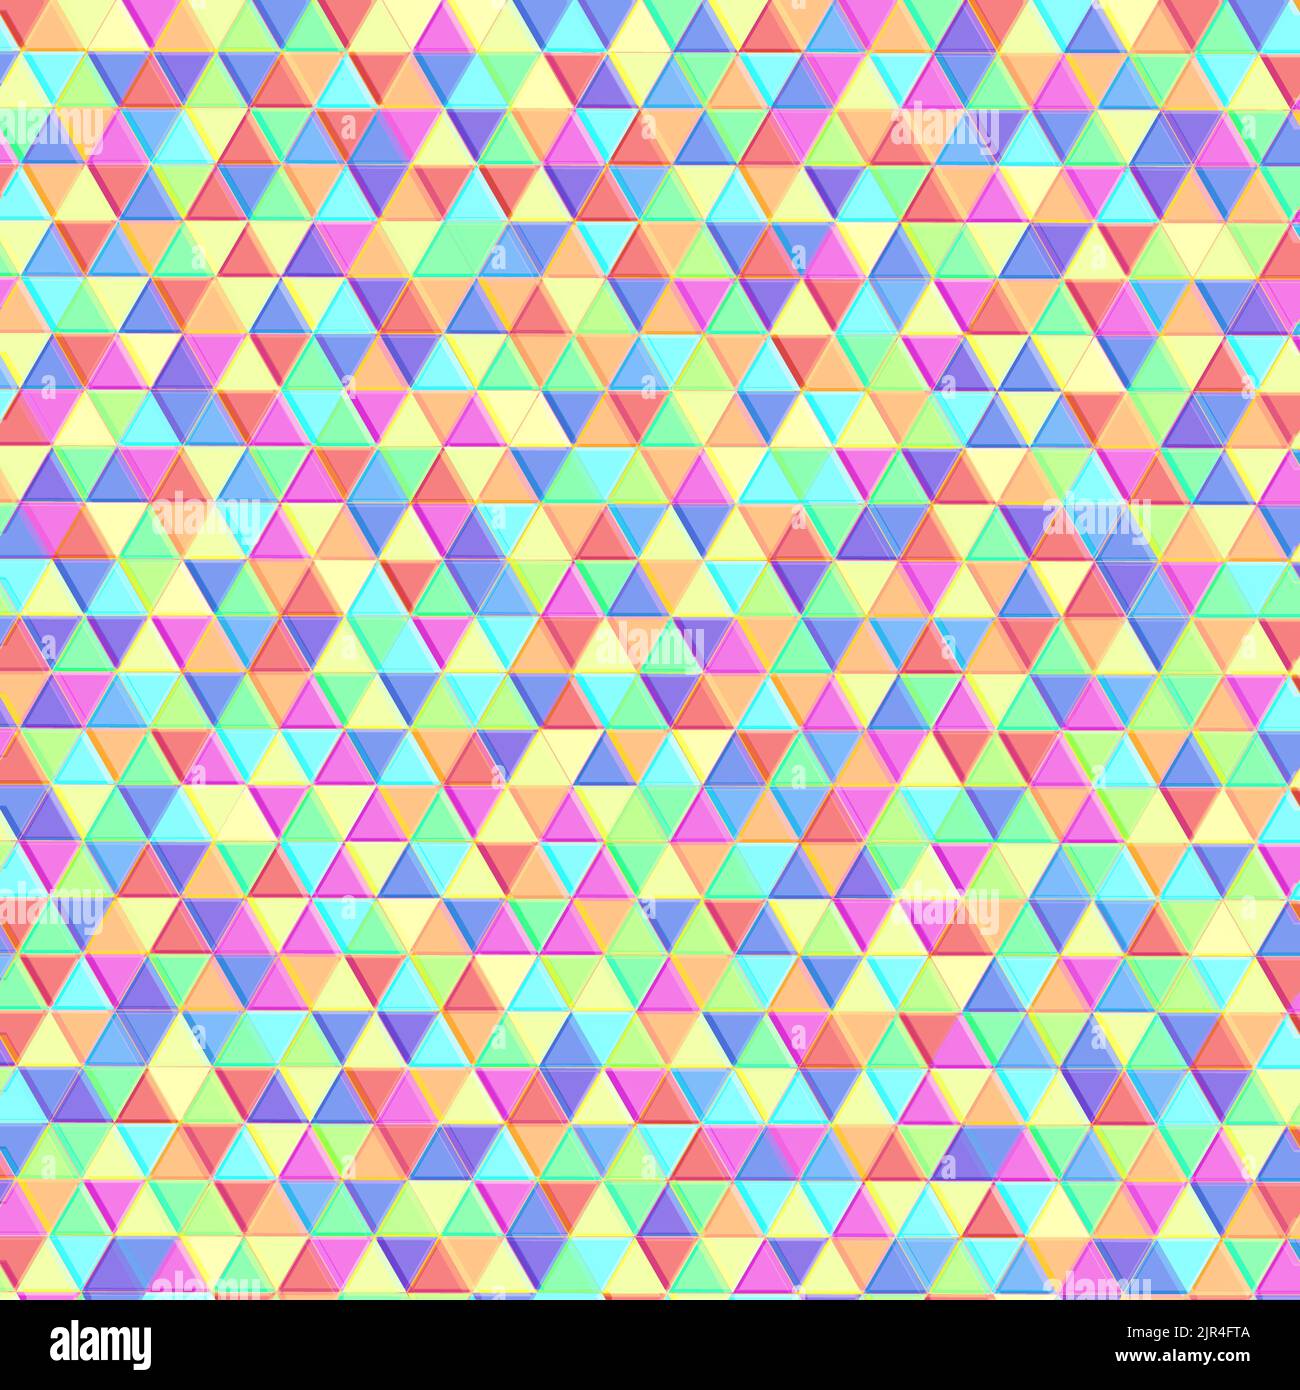 Colorful triangles as graphic texture or background as 3d rendered illustration Stock Photo